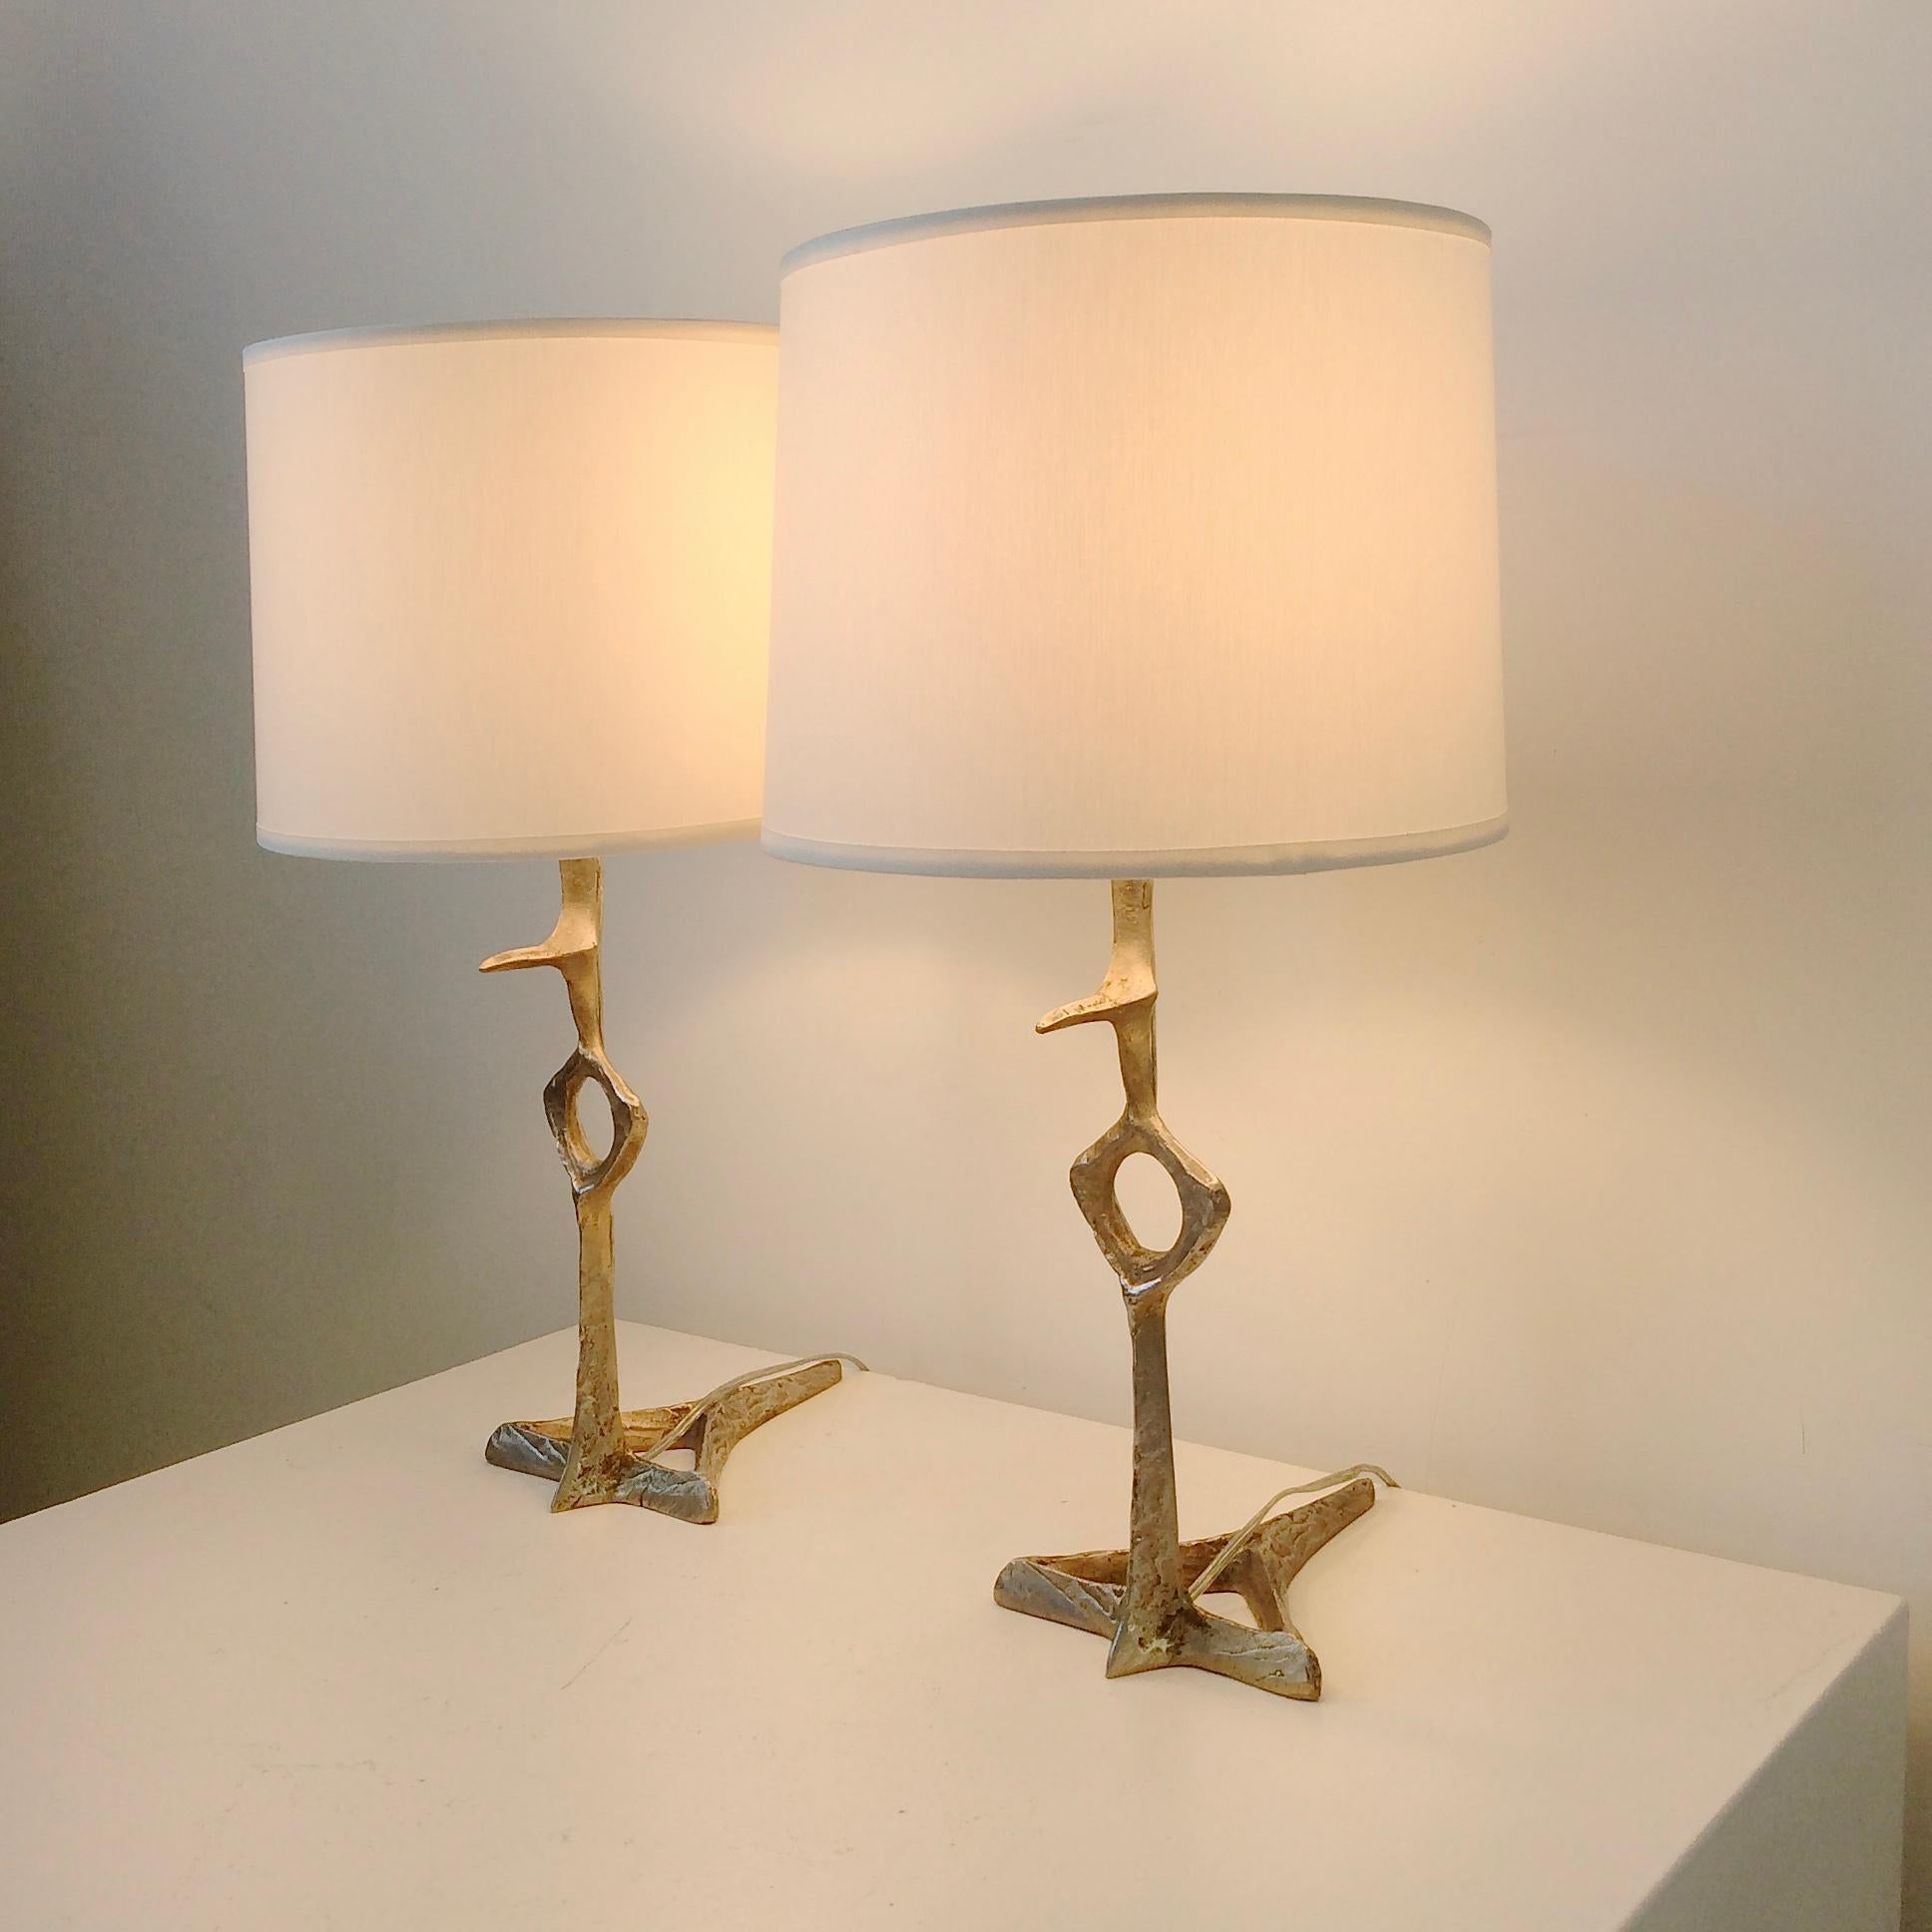 Felix Agostini, rare pair of little table lamps, Bird model, circa 1960, France.
Gilt bronze, new off-white fabric shades.
Rewired, B22 bulbs of 40 W.
Dimensions: total height: 35 cm , diameter 18cm. Height of the bronze only: 22 cm.
All